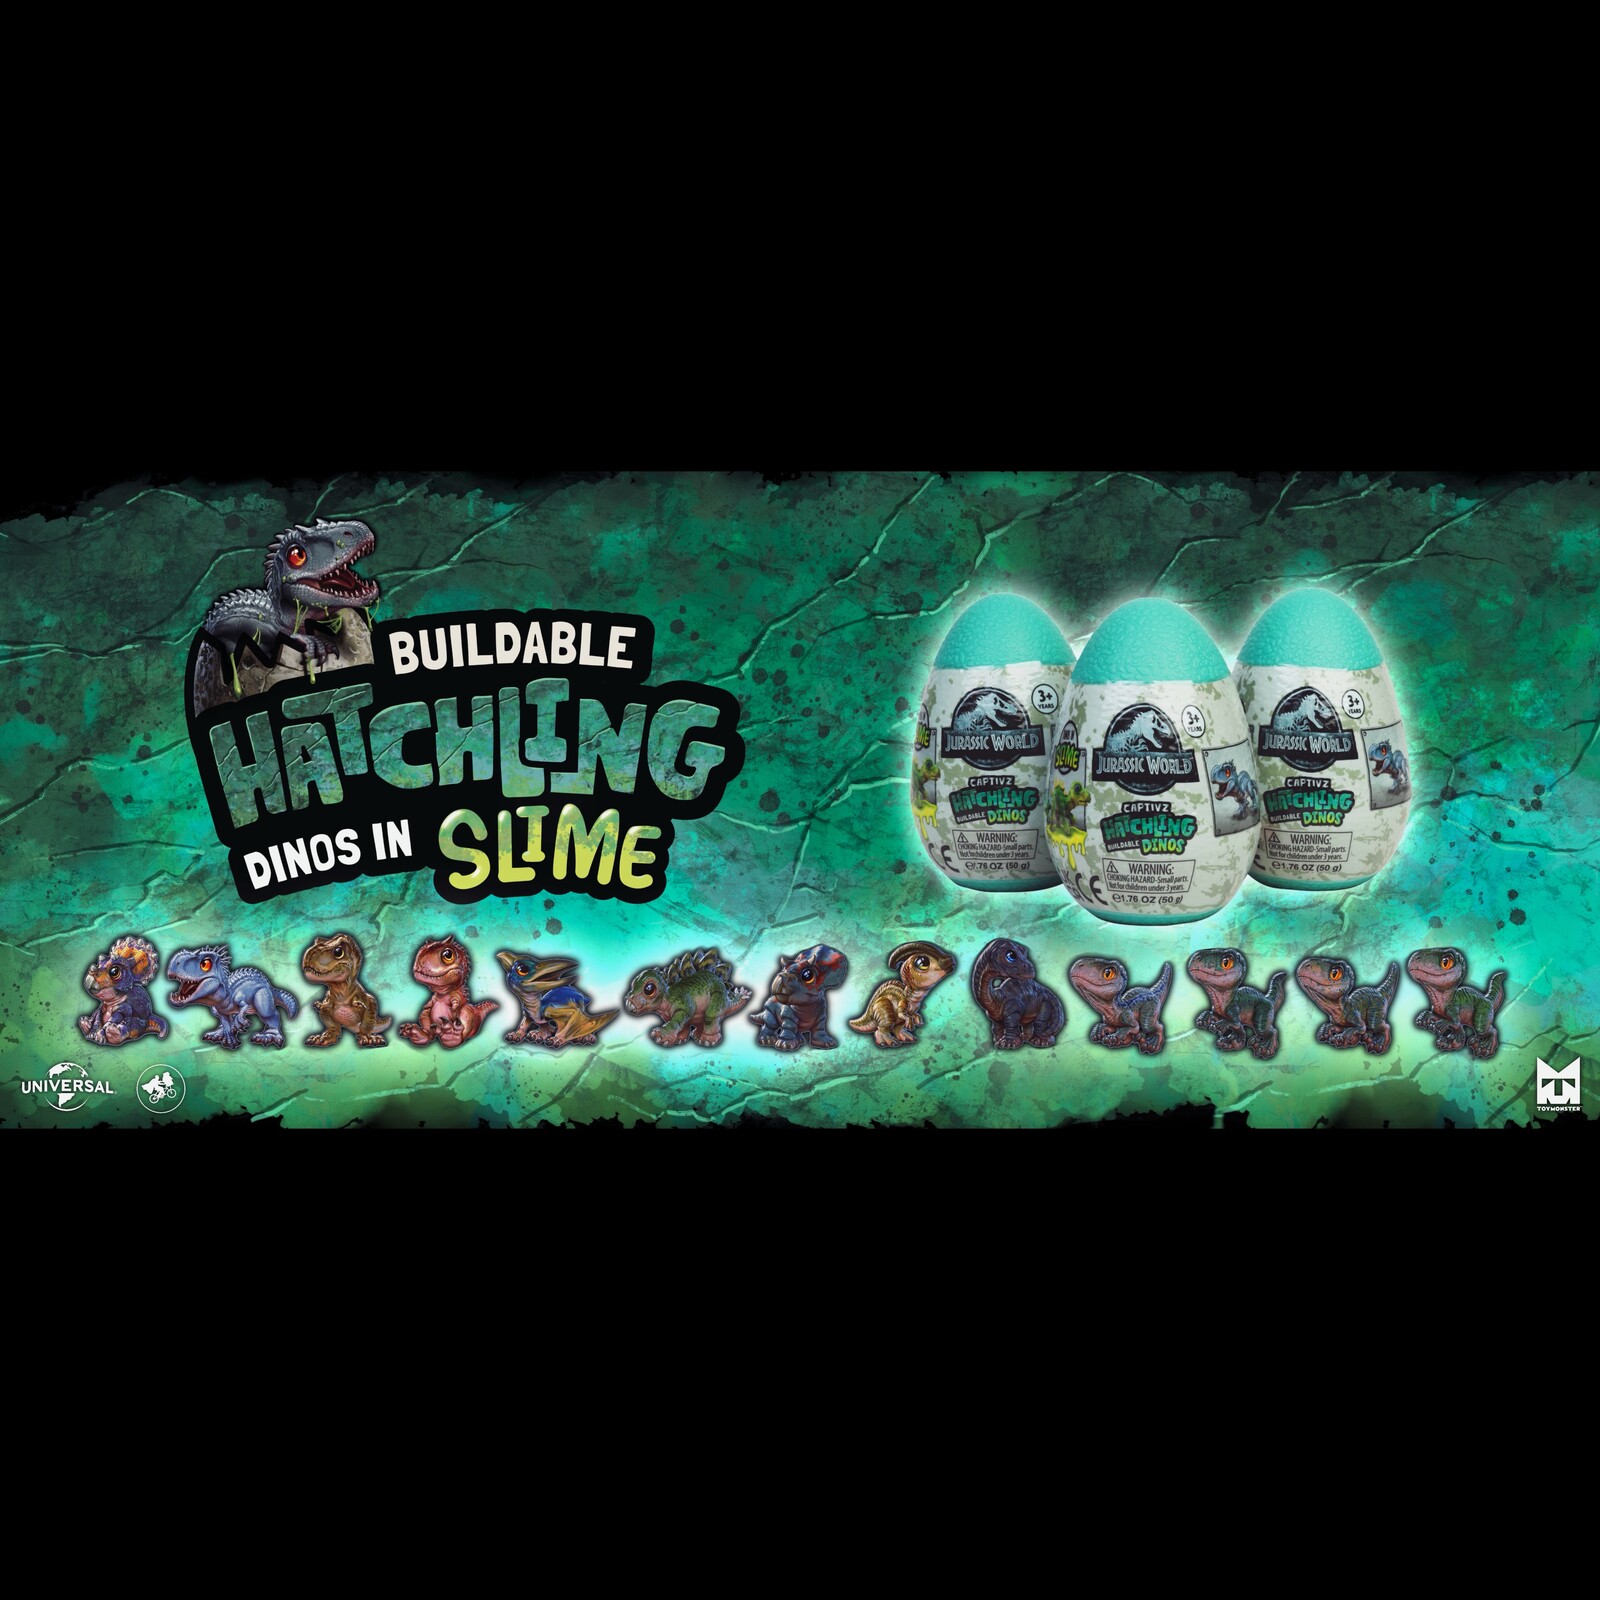 Buildable Hatchling Dinos